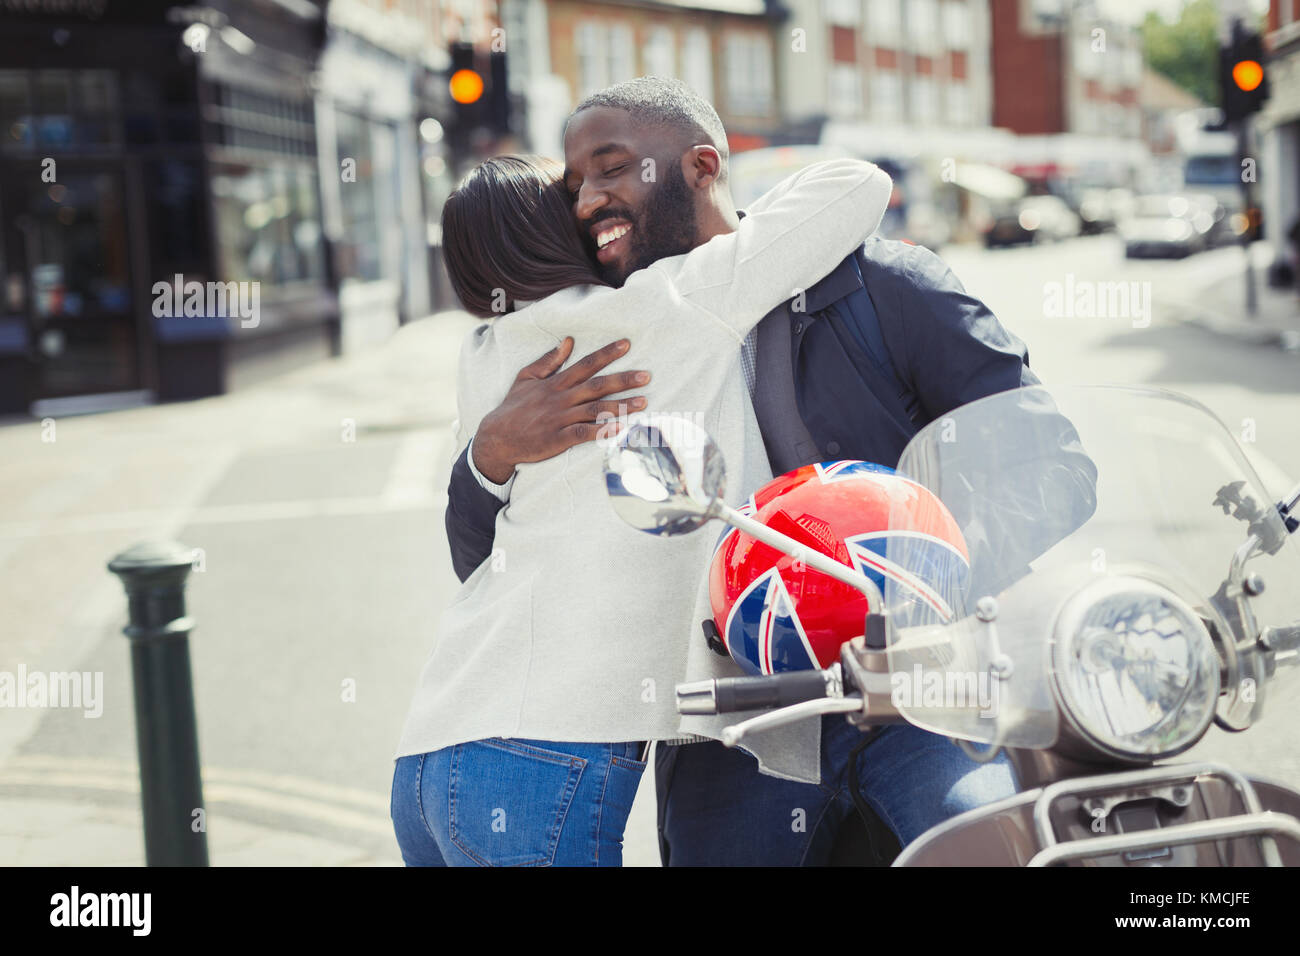 Affectionate young couple hugging at motor scooter on sunny urban street Stock Photo